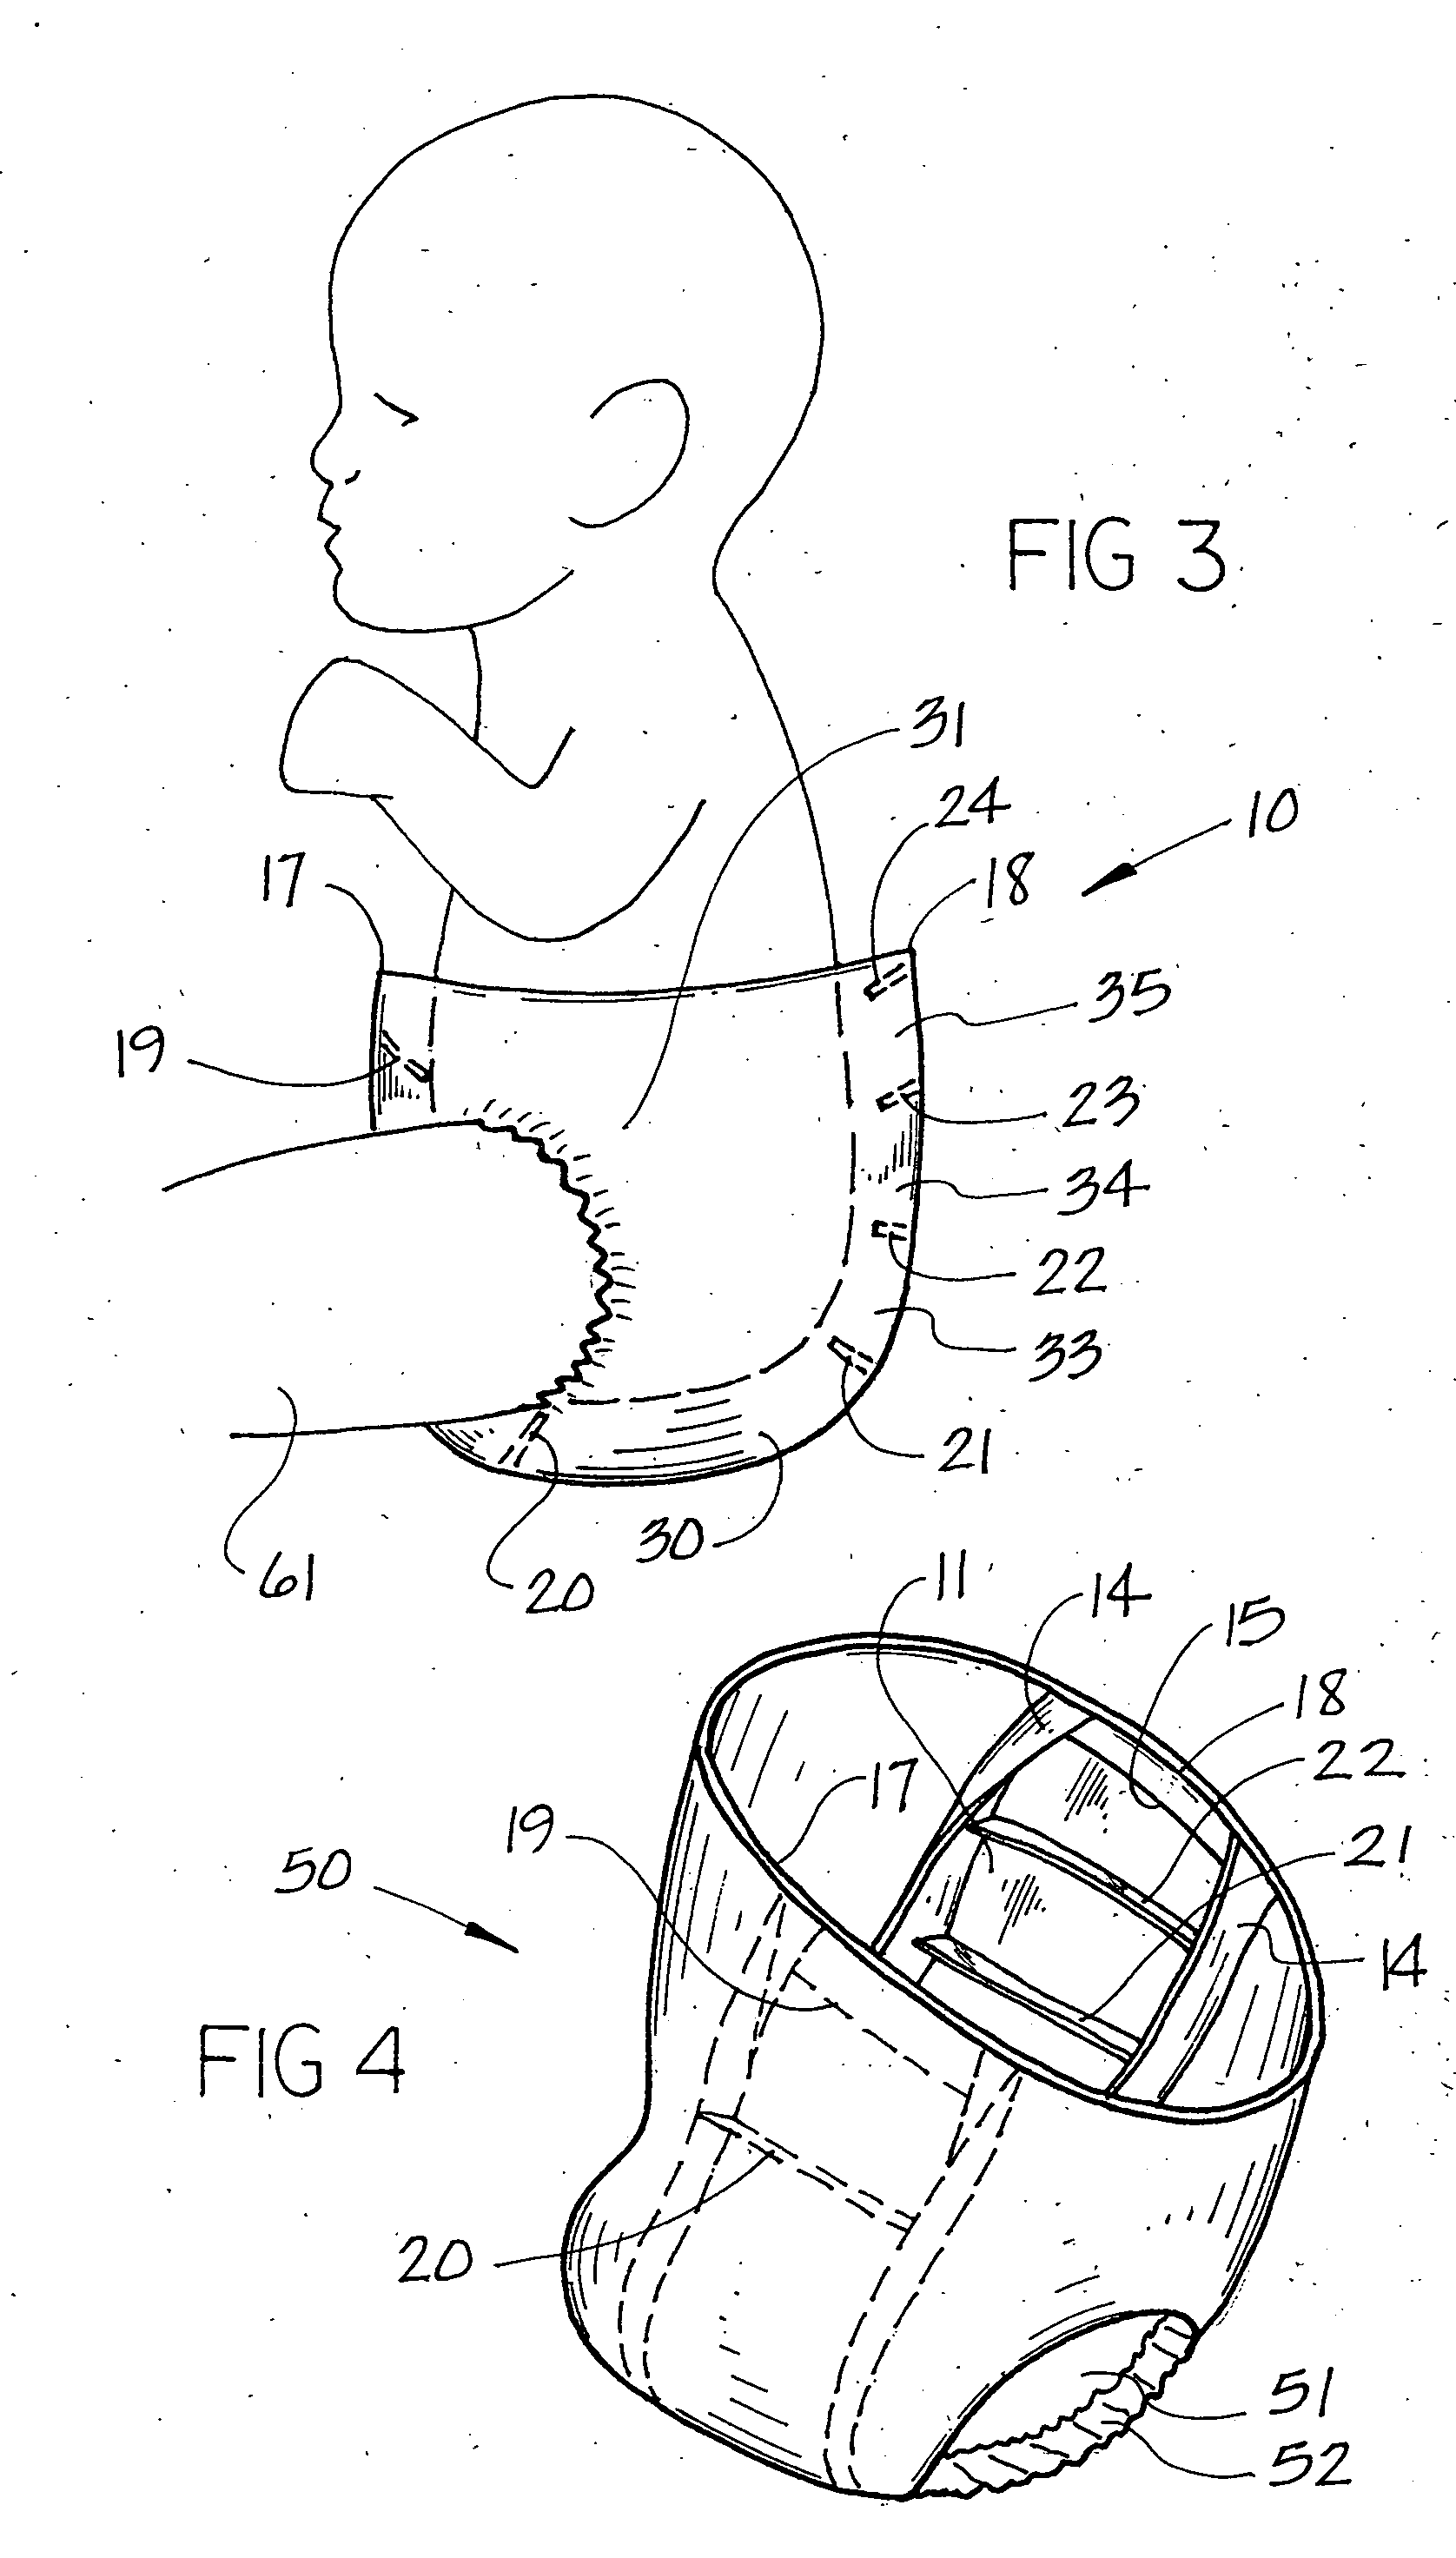 Diaper with baffle overflow protection